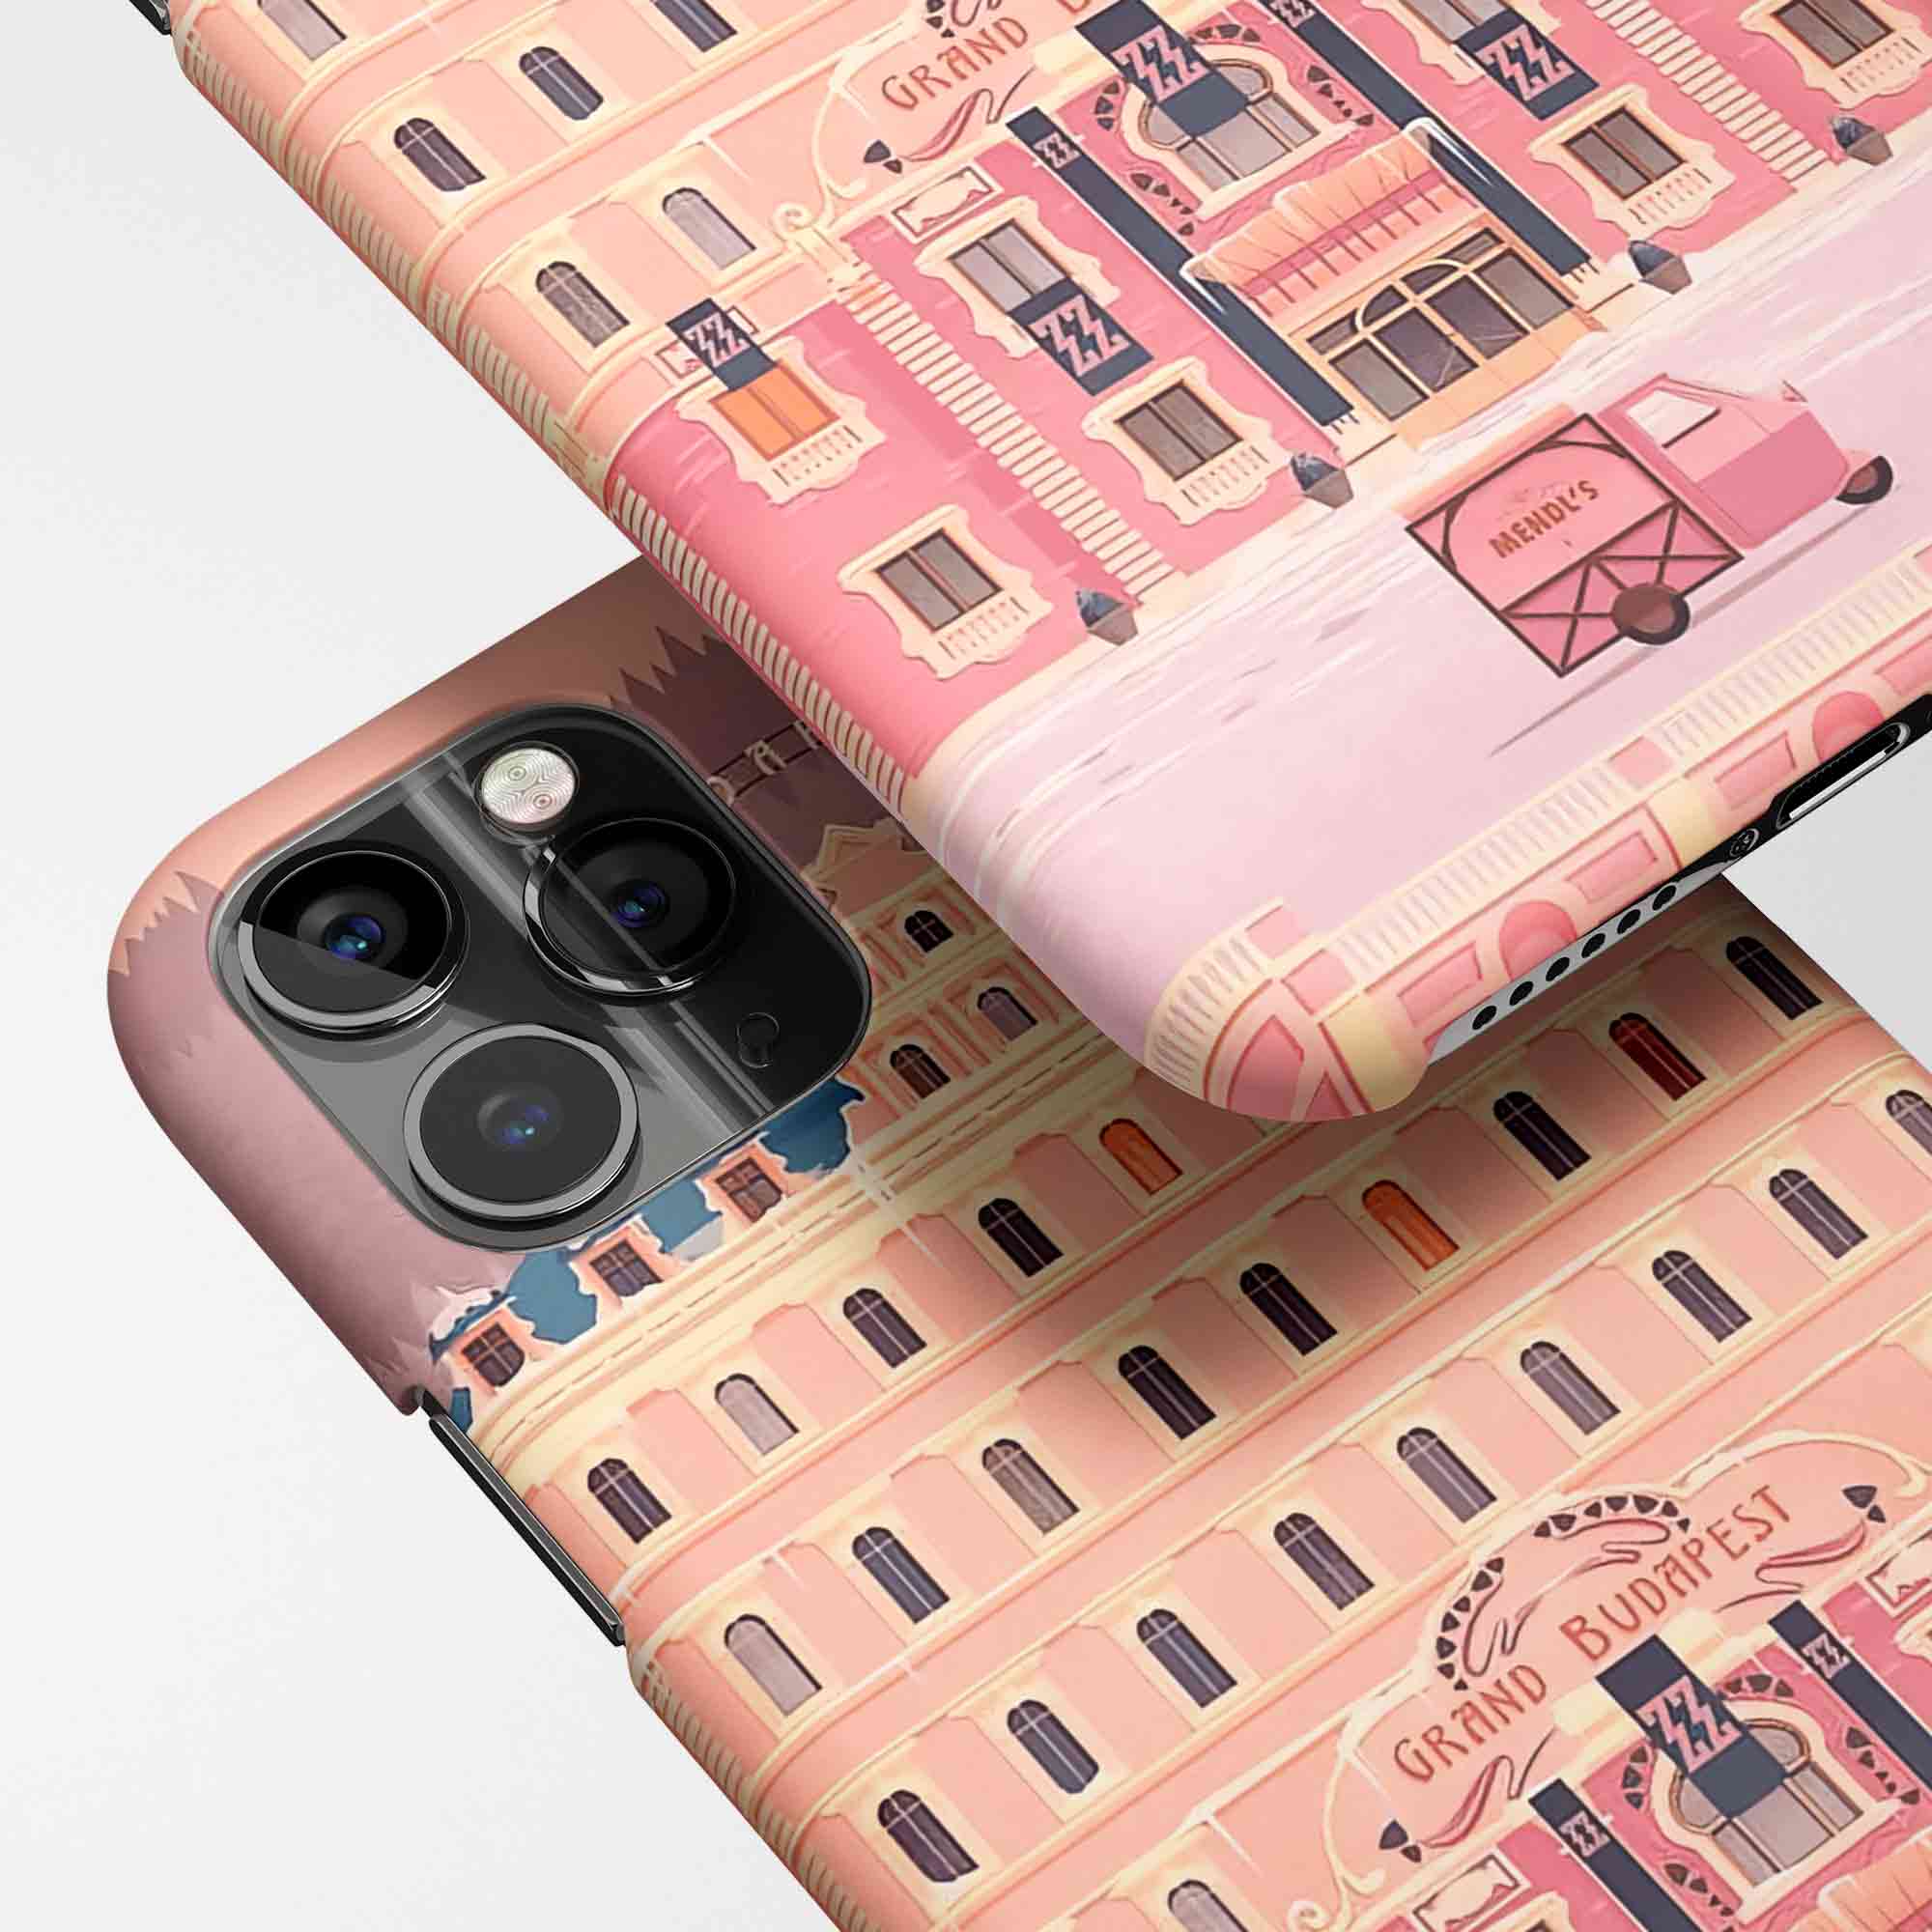 The Grand Budapest Hotel iPhone Case